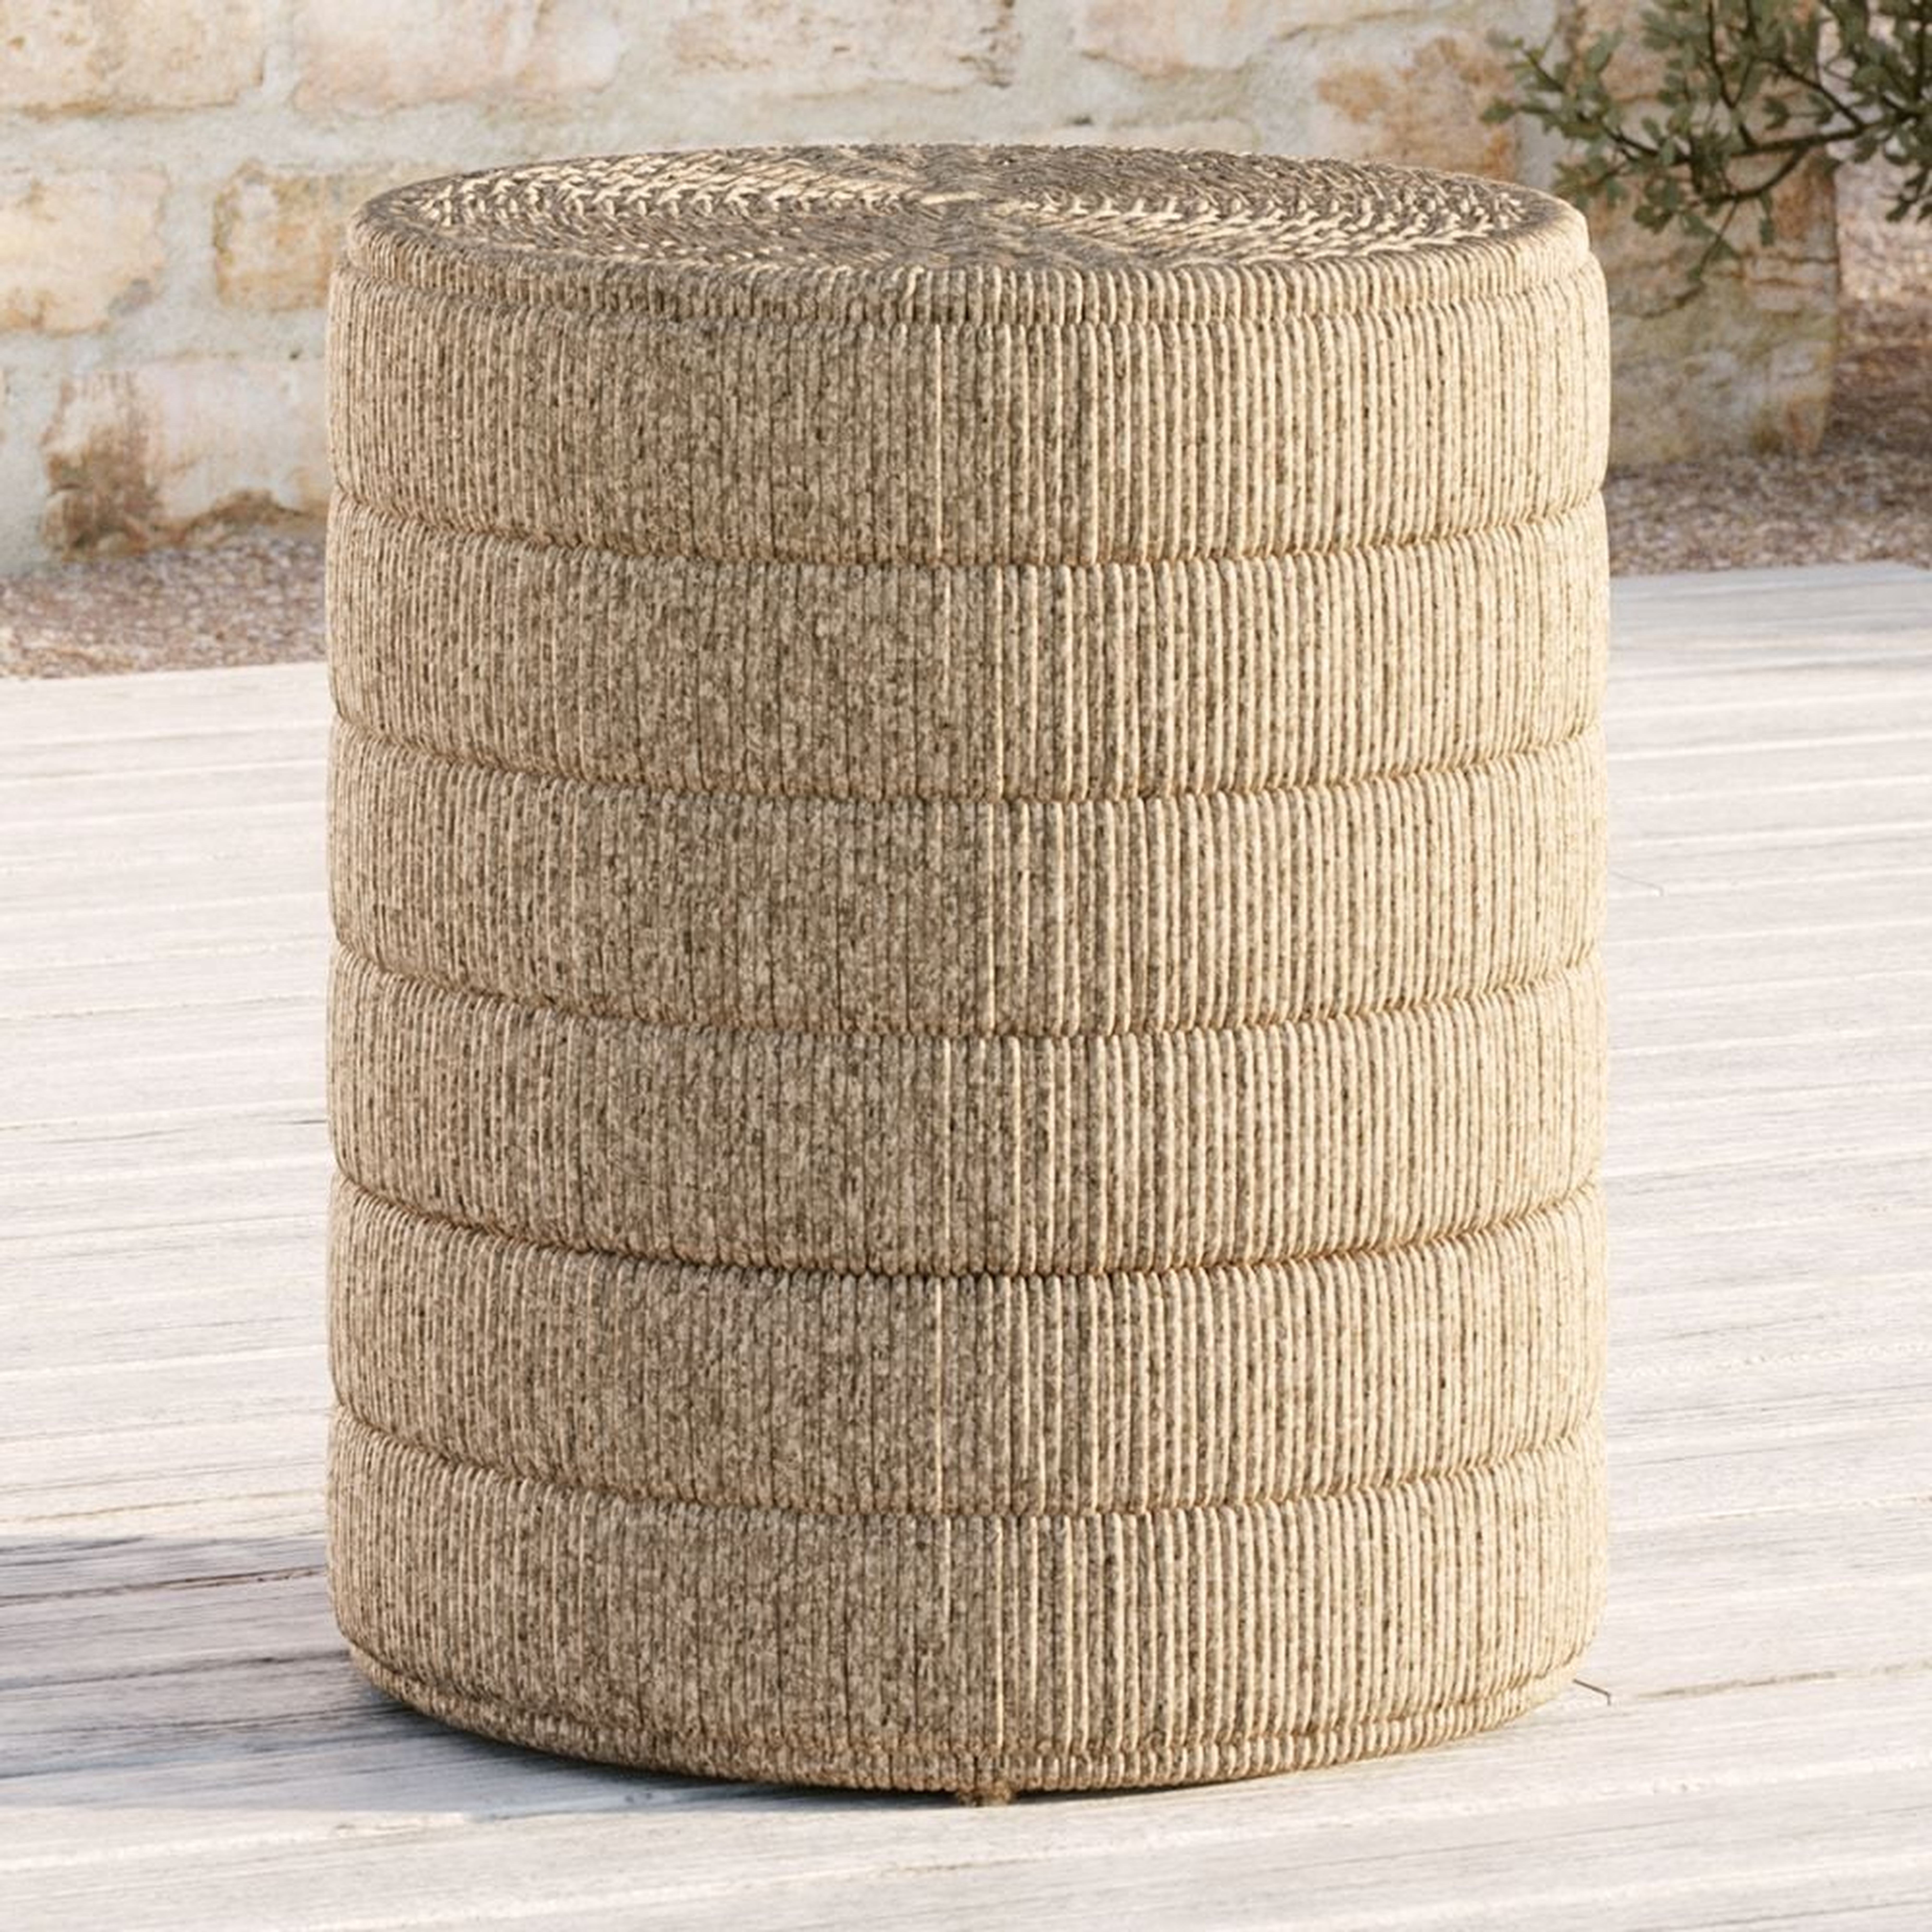 Madura Woven Outdoor Side Table - Crate and Barrel